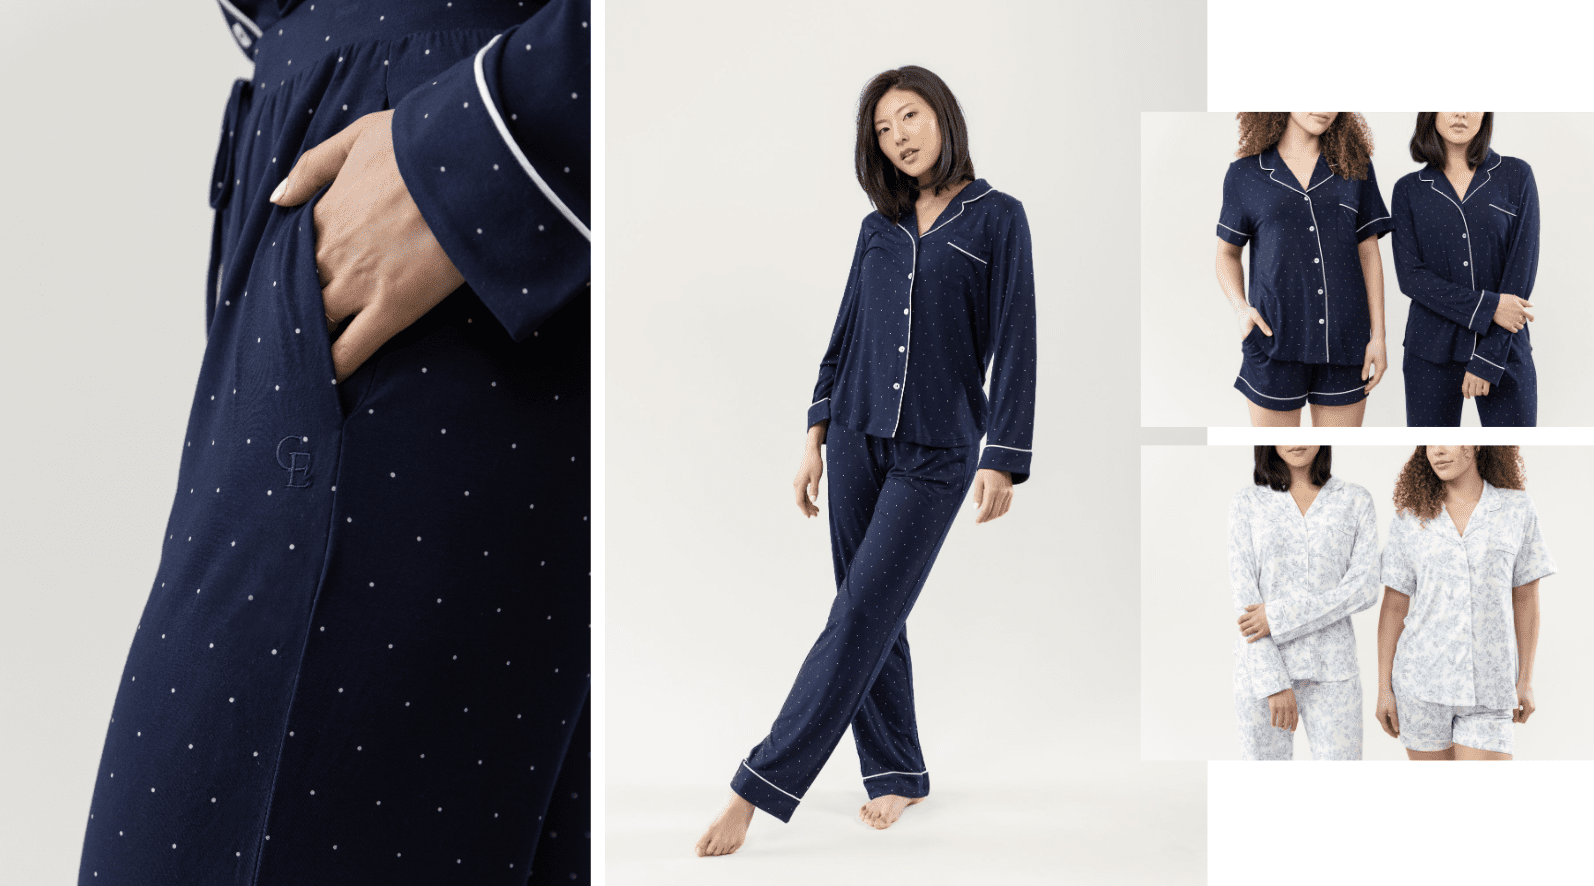 Cozy Earth bamboo pajamas in navy and floral